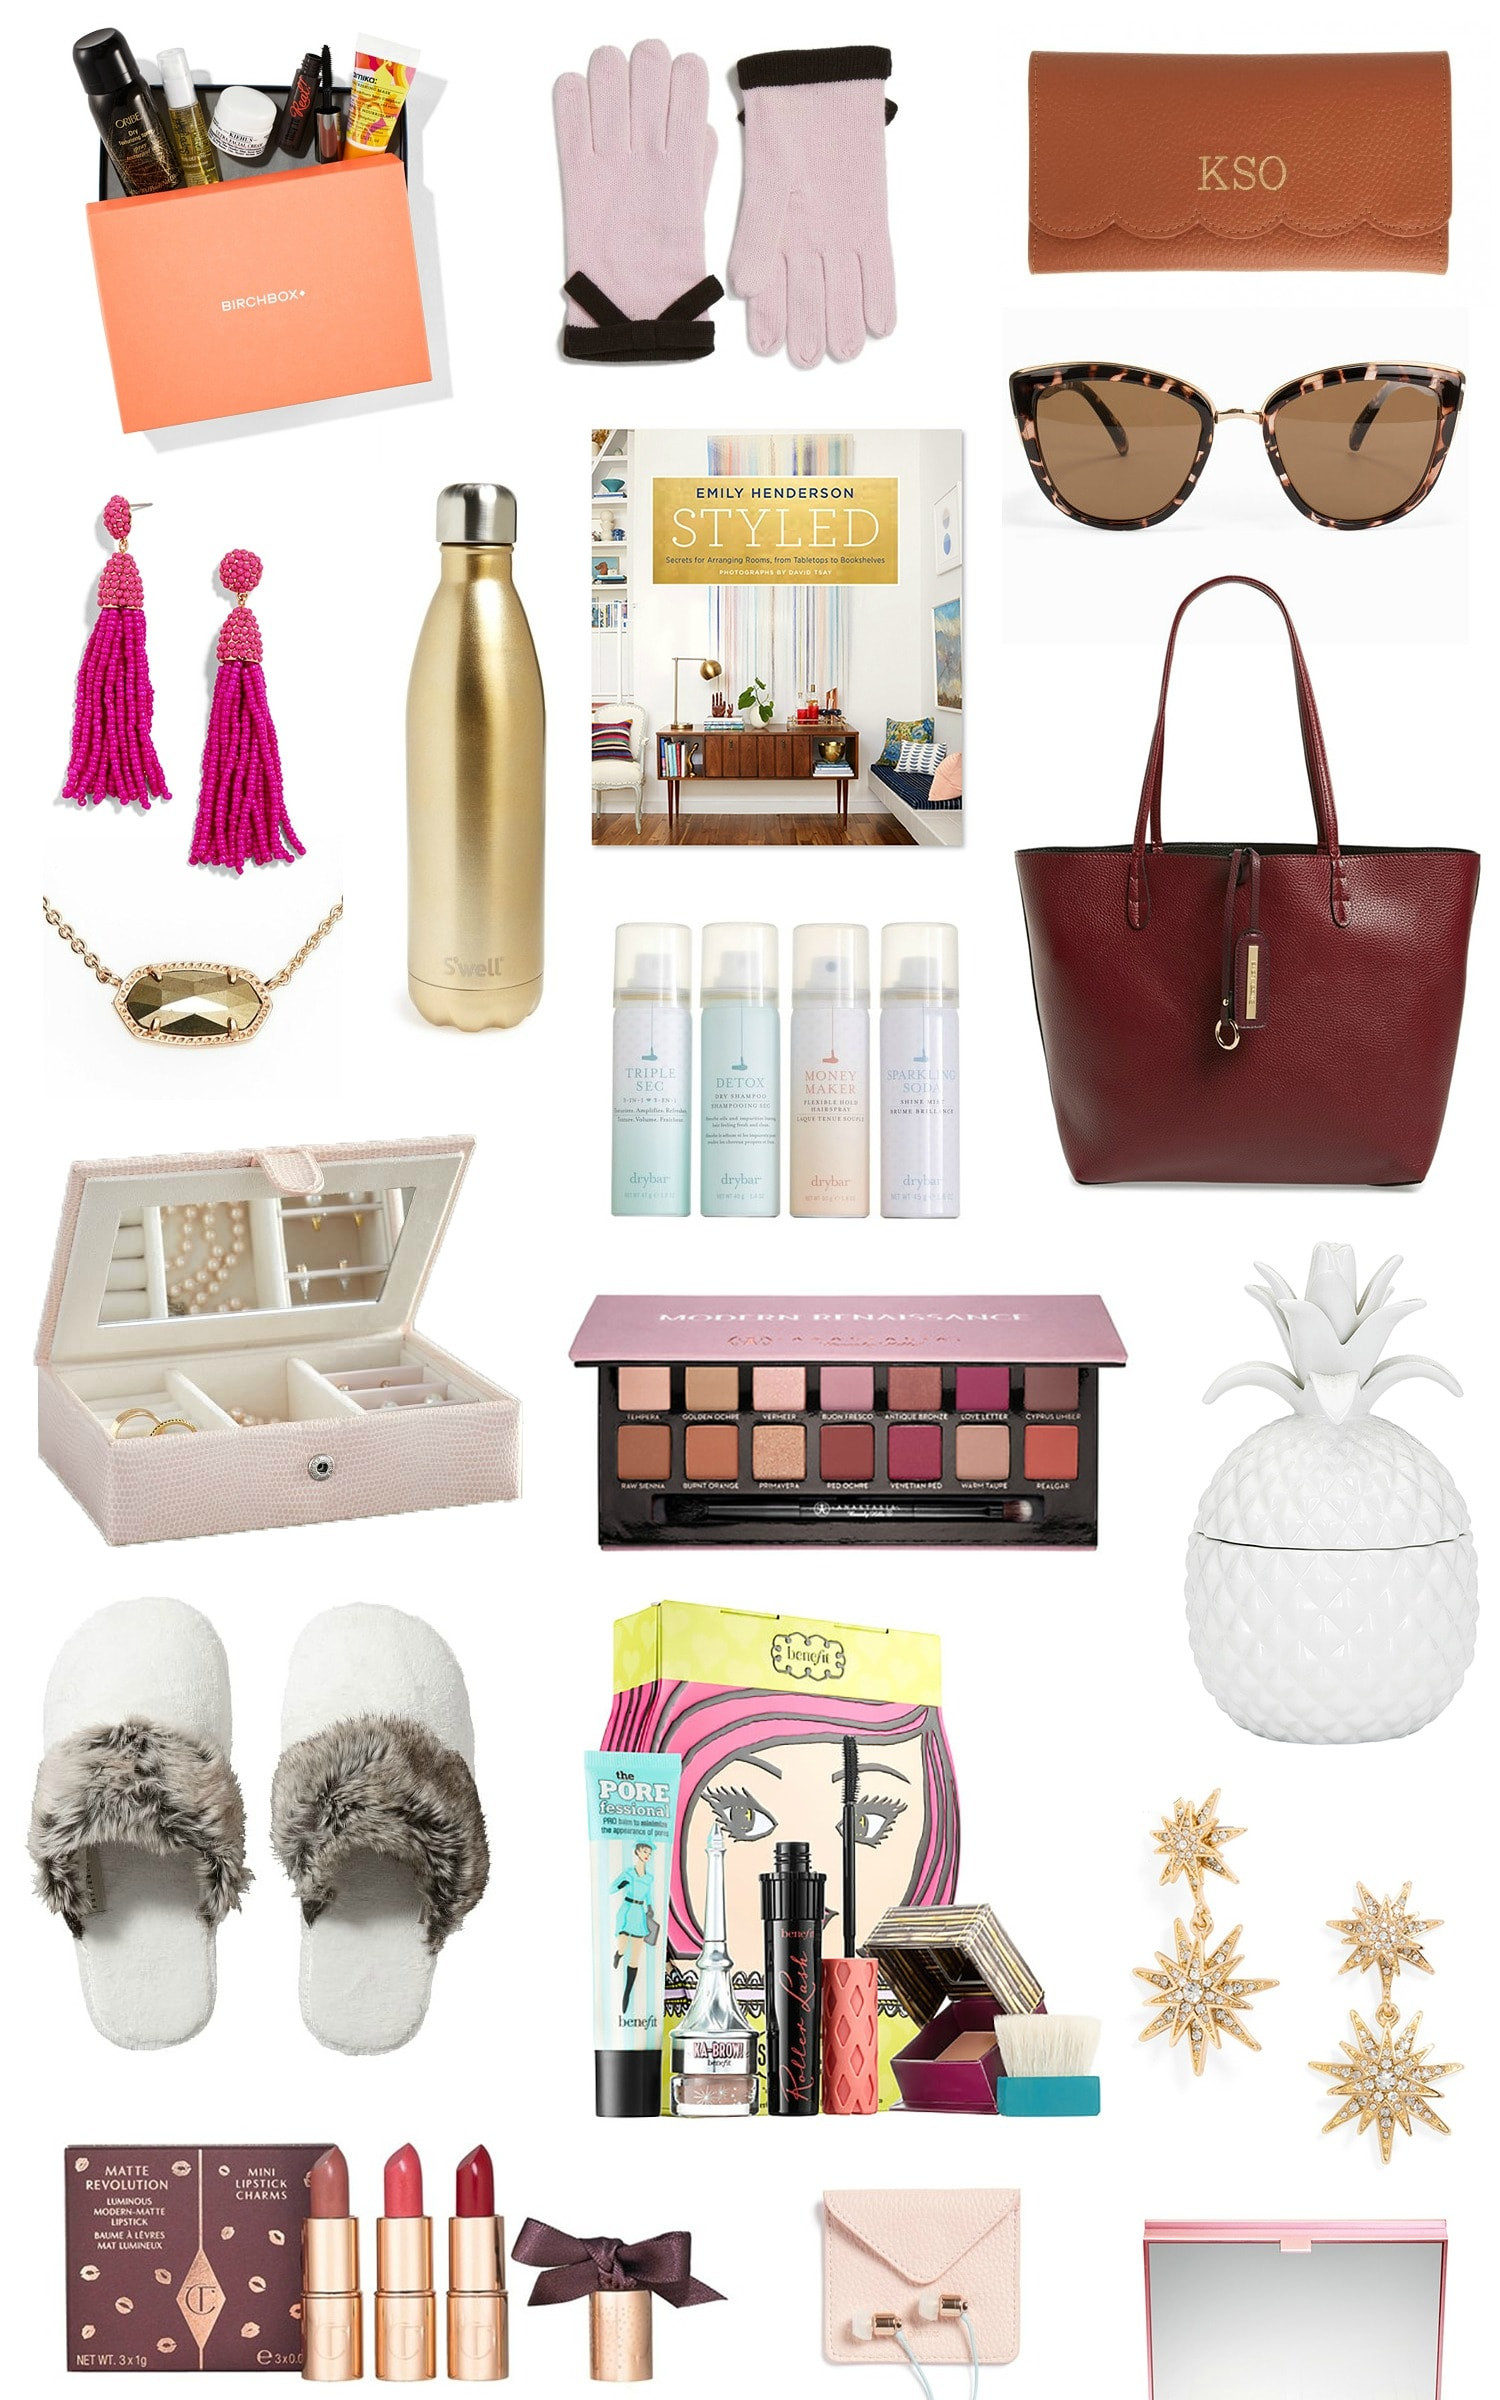 Good Holiday Gift Ideas
 The Best Christmas Gift Ideas for Women under $50